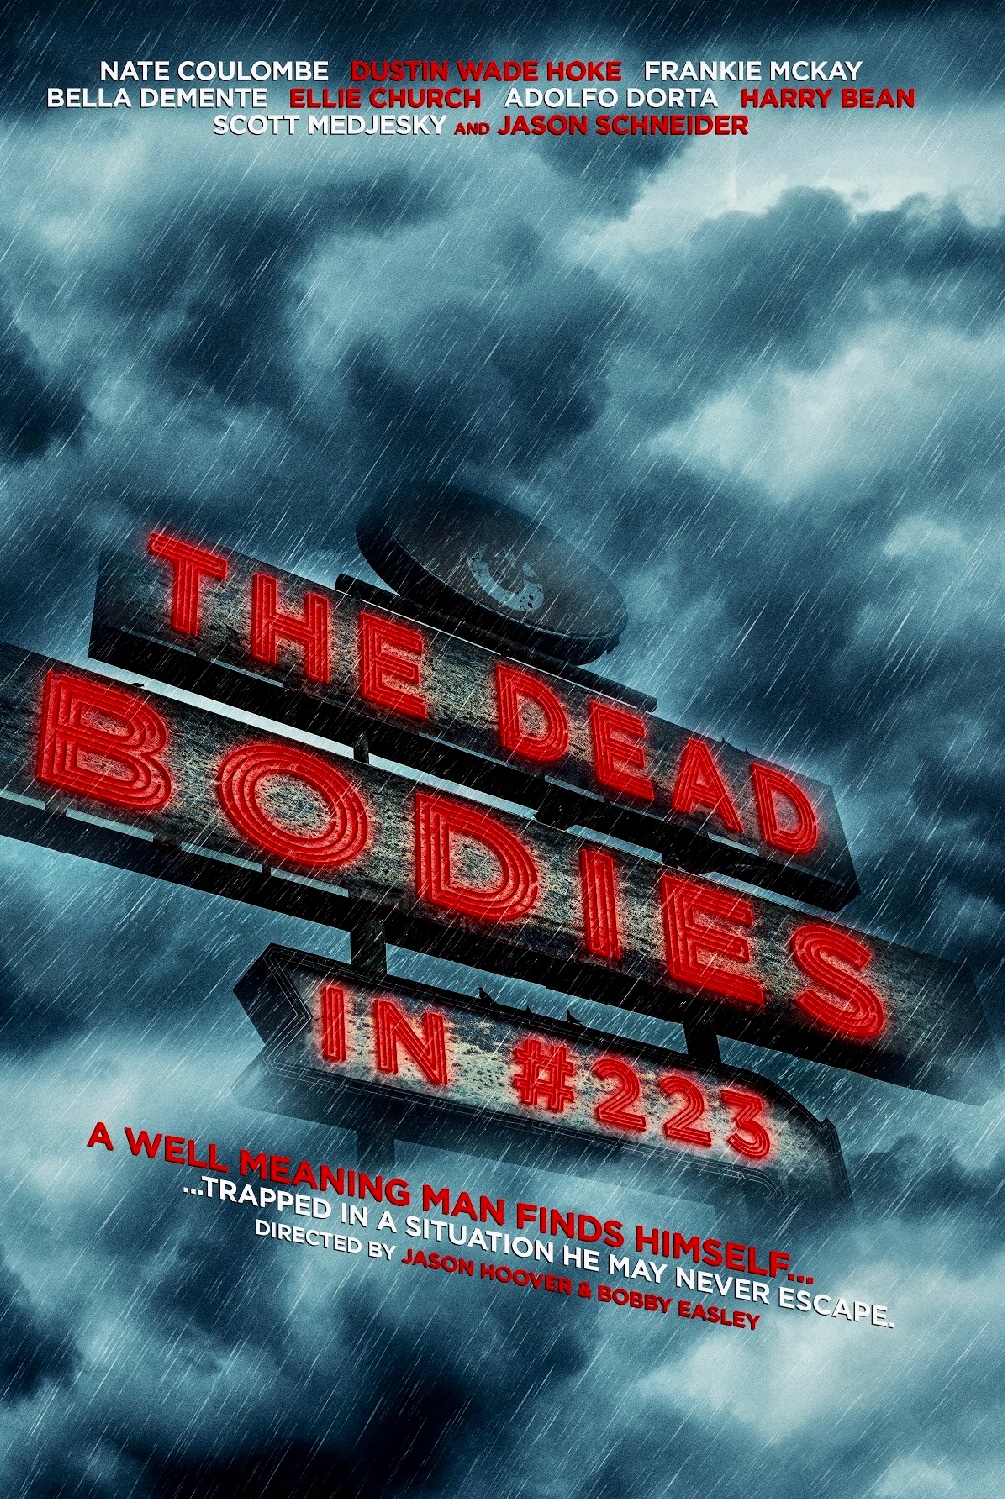 The Dead Bodies in #223 (2017)